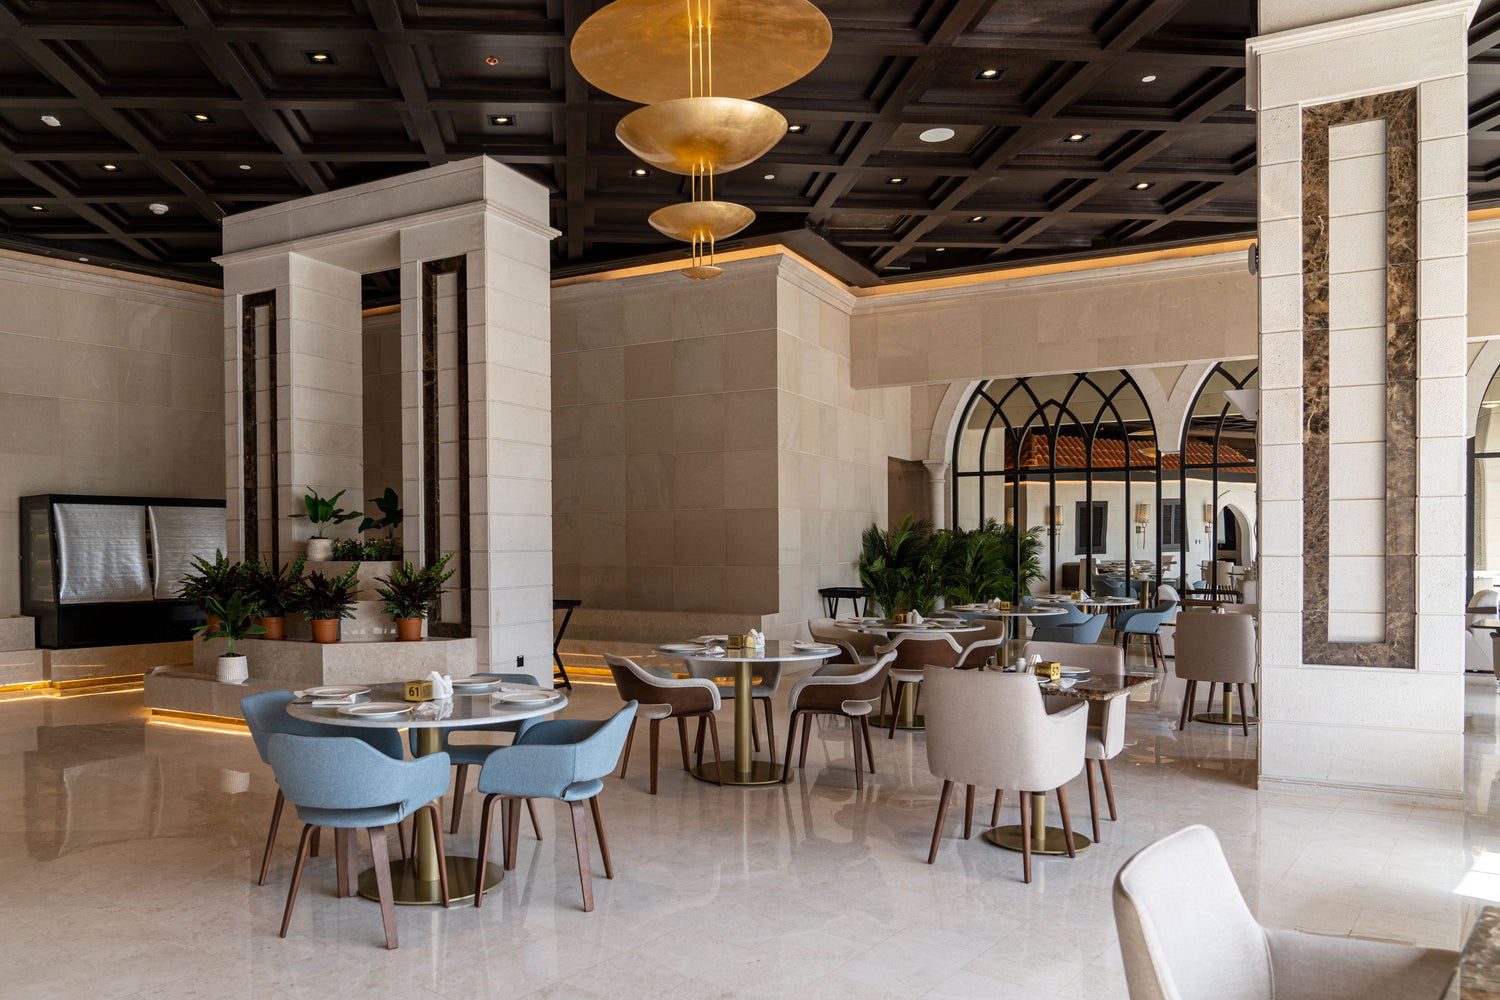 Restaurant Furniture Supply by Atelier 21 KSA for Wafi Gourmet